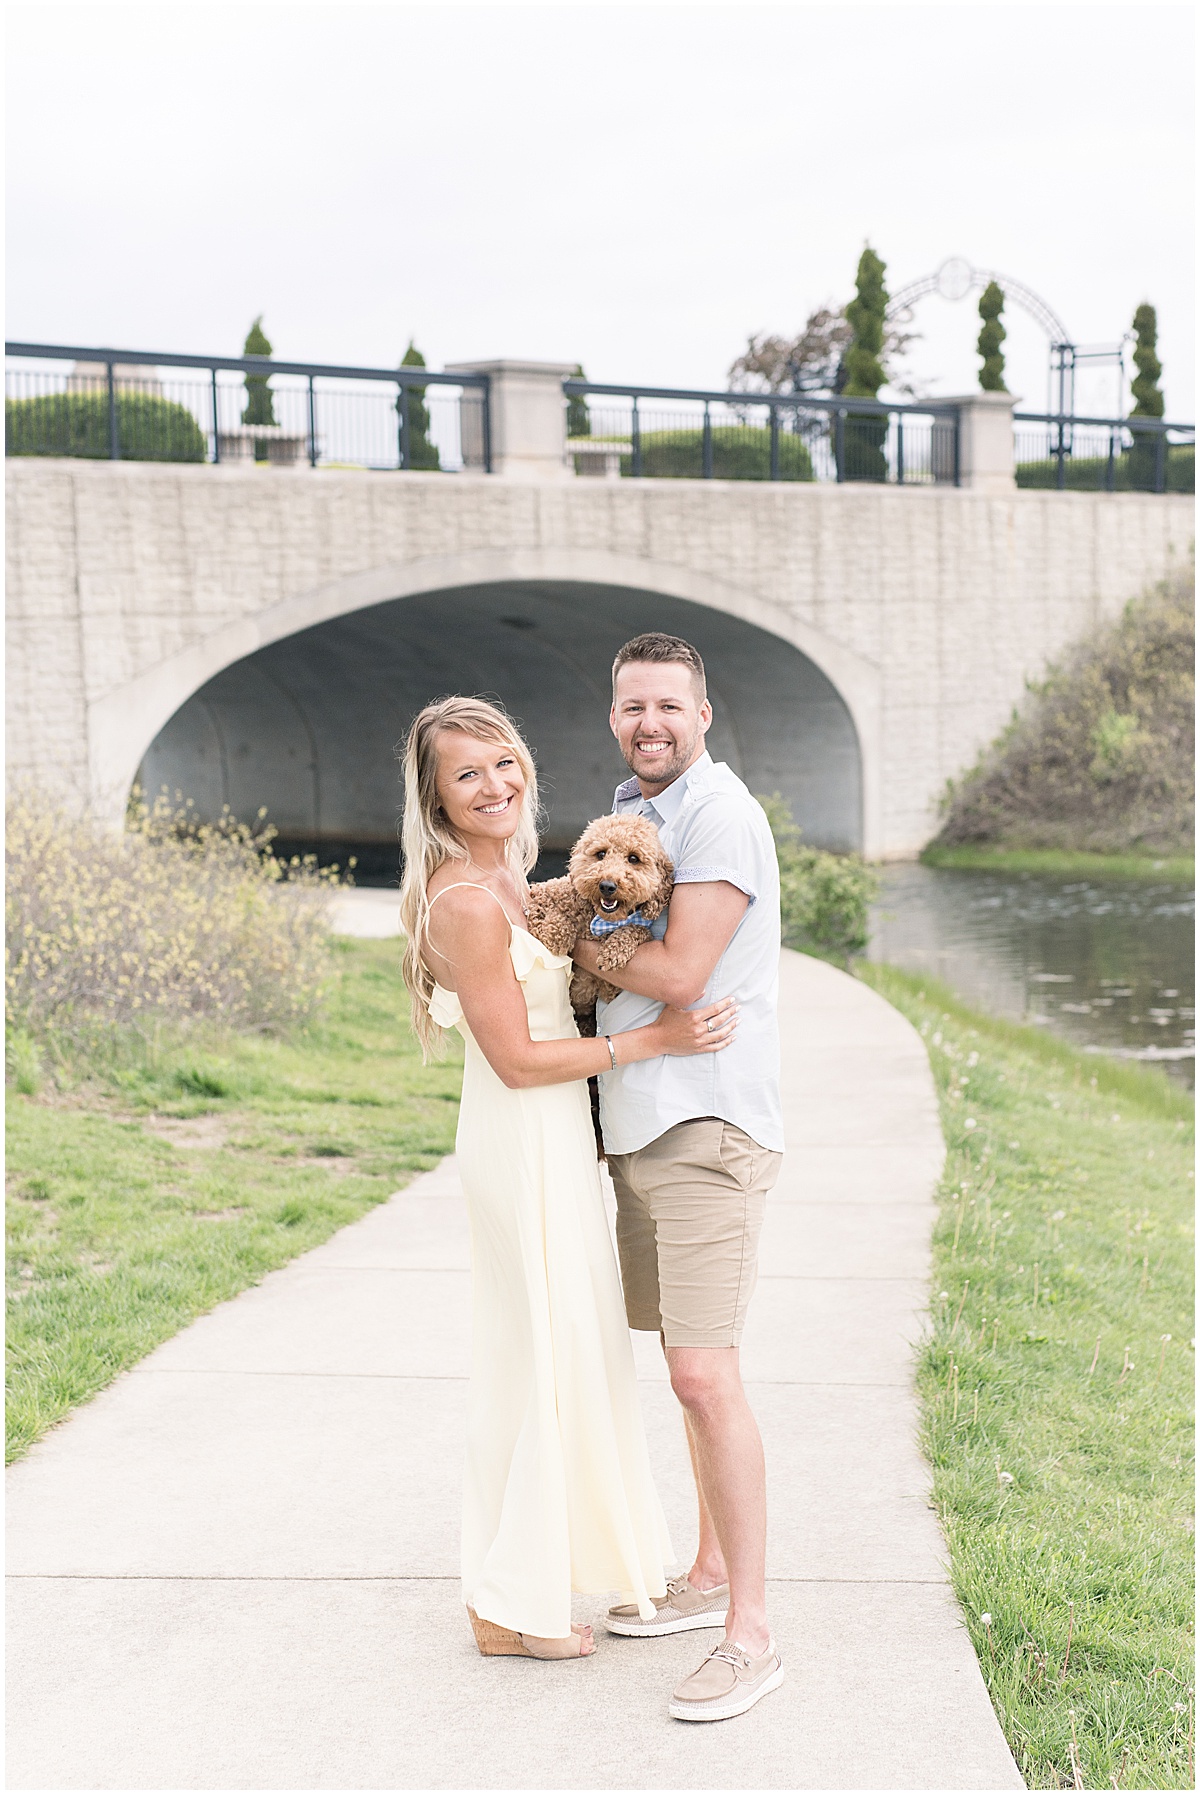 Coxhall Gardens Engagement Photos in Carmel, Indiana with dog